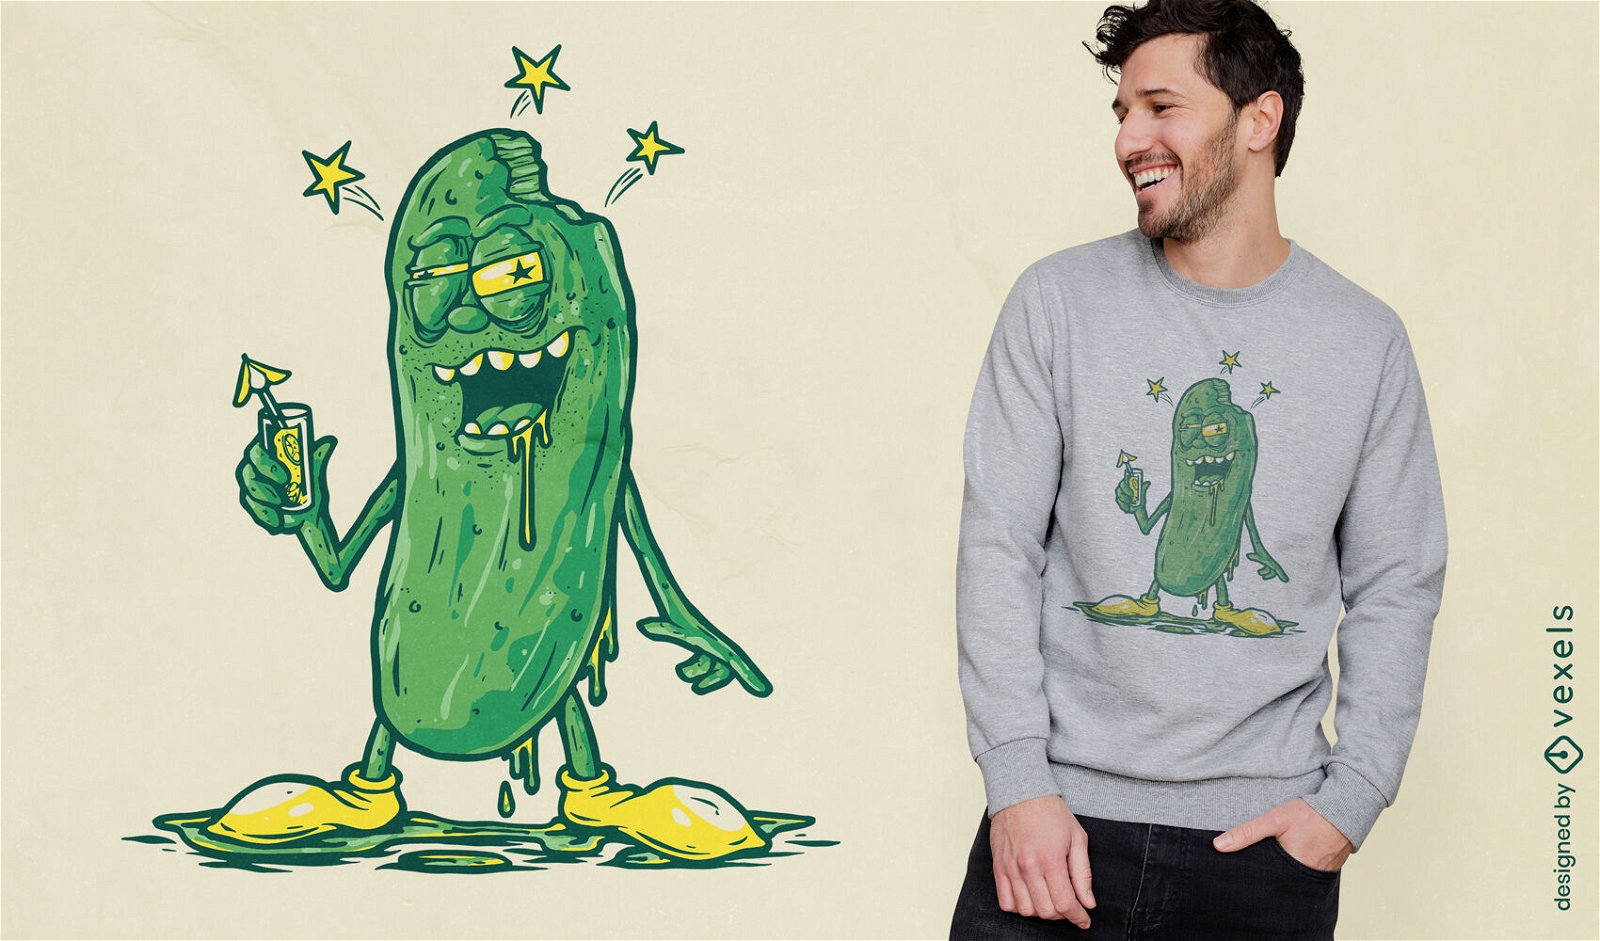 pickle cartoon pictures